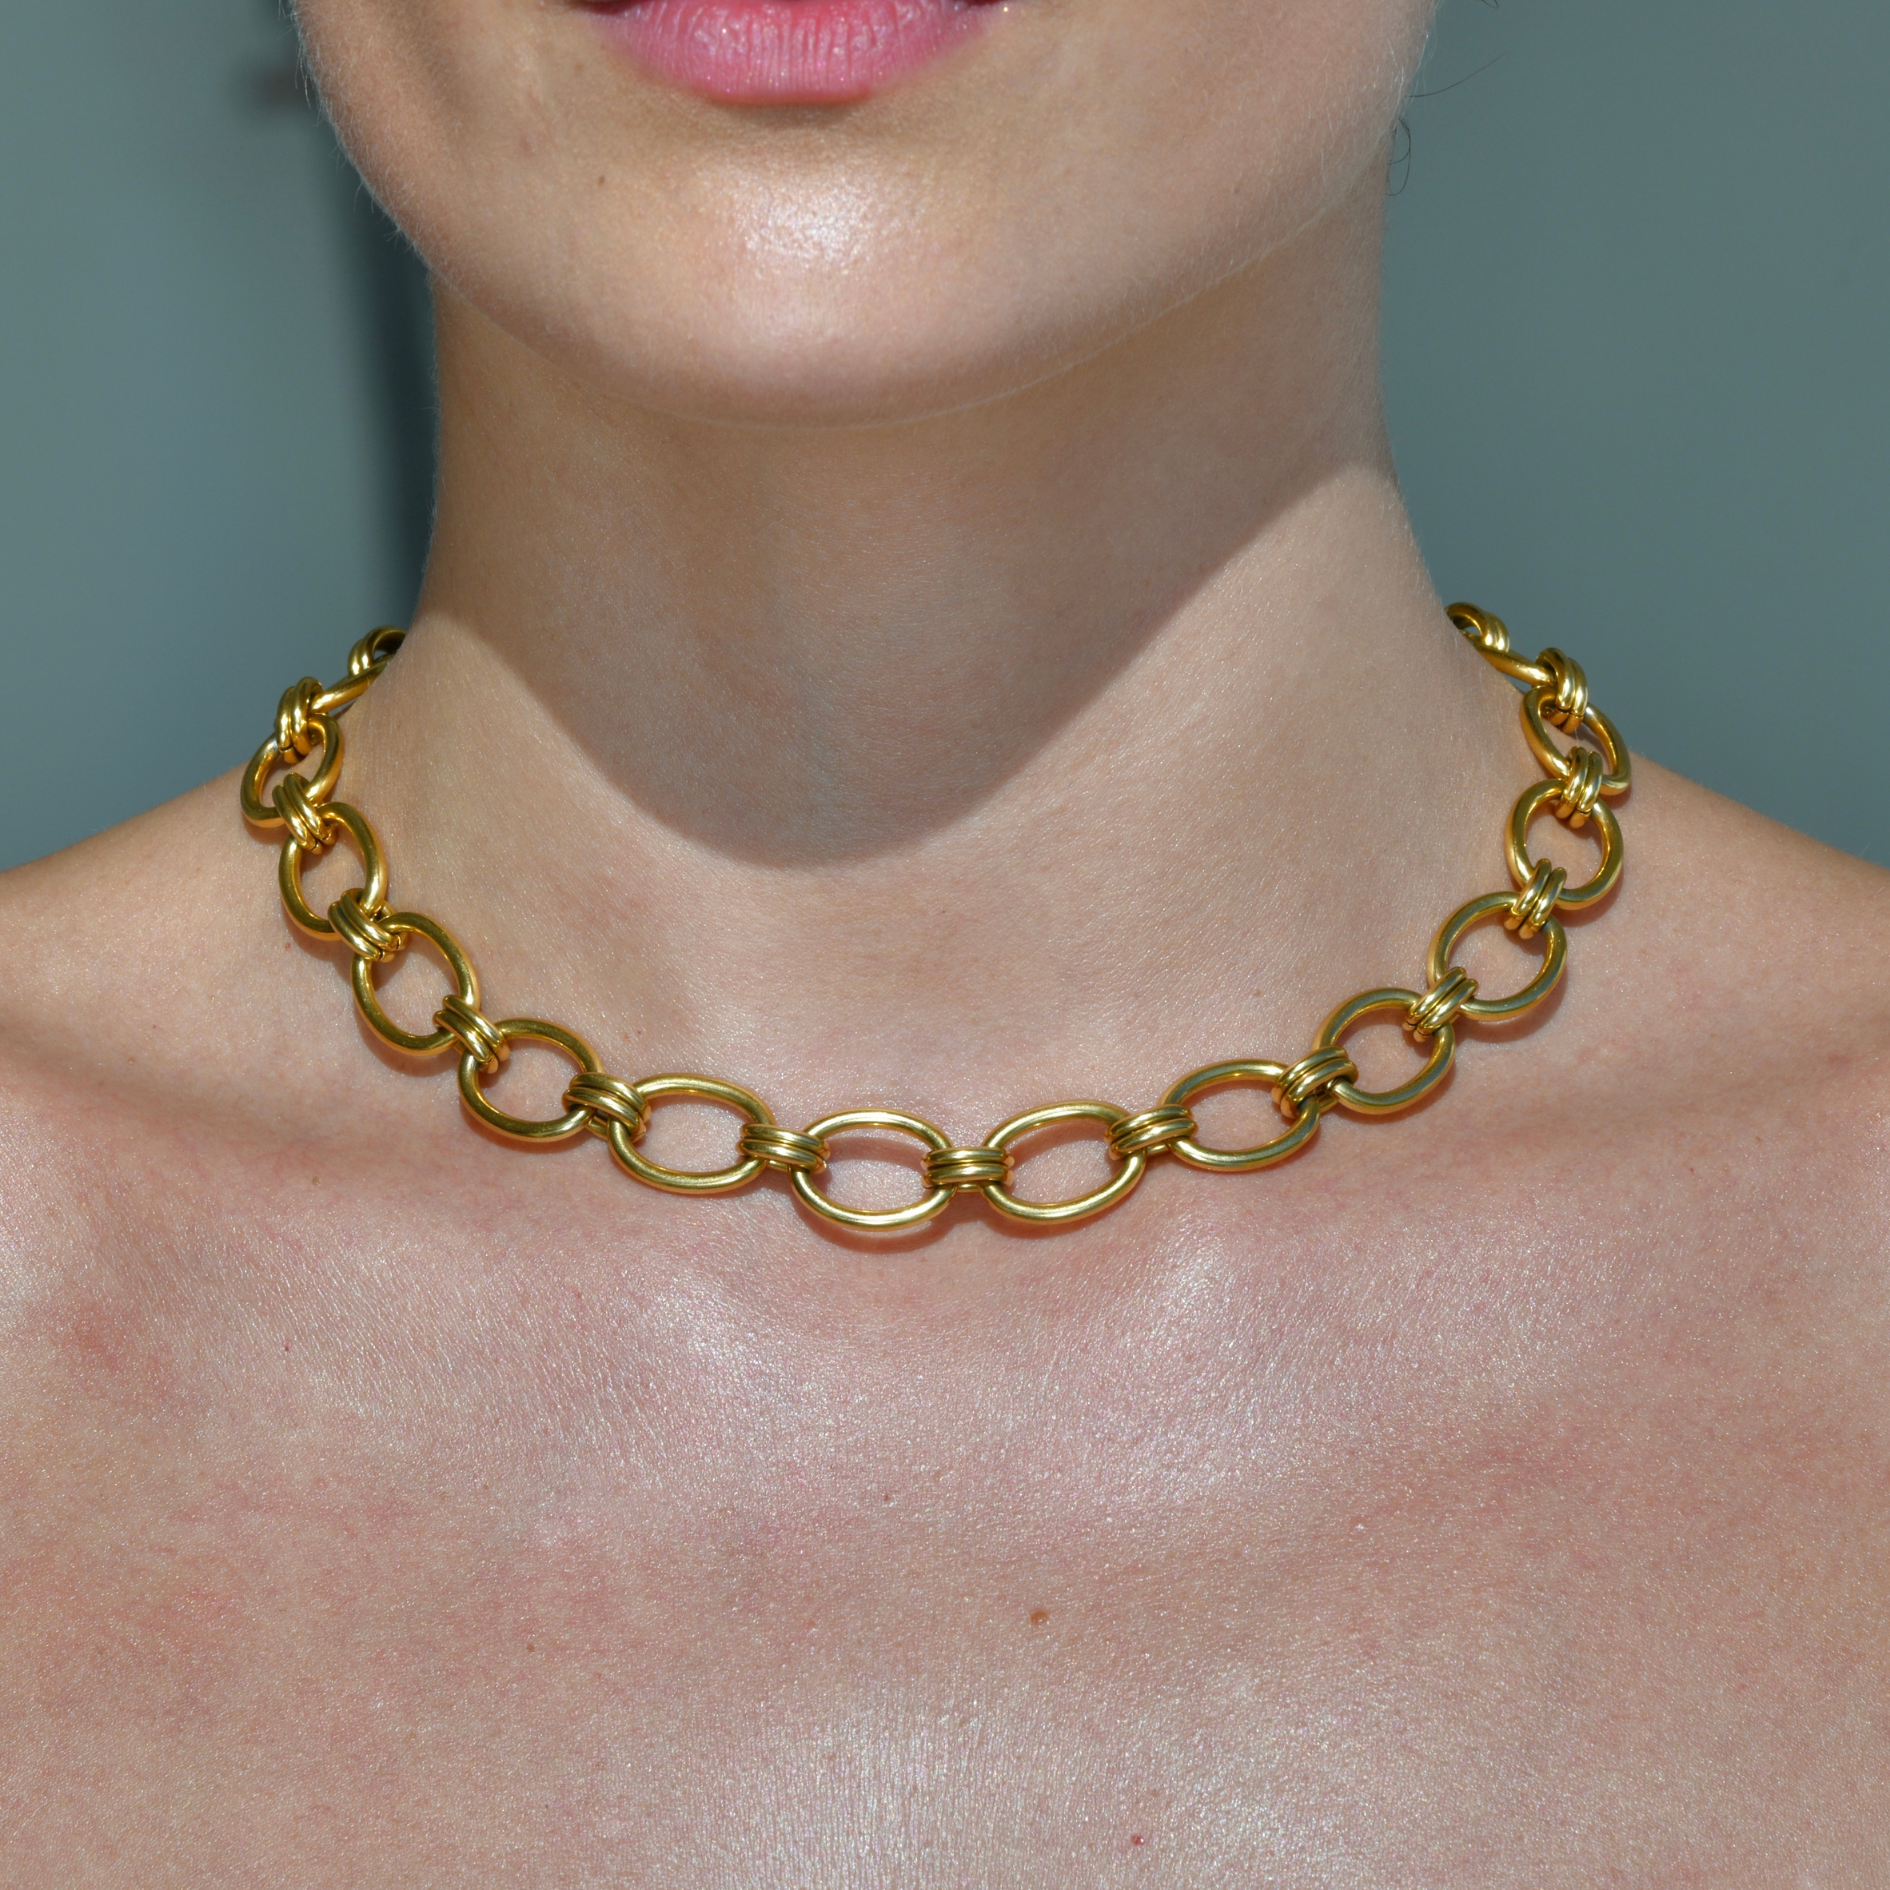 VJOSA Gold Chain Necklace - Oval shape chain pieces atached with one another. Bold Gold necklace